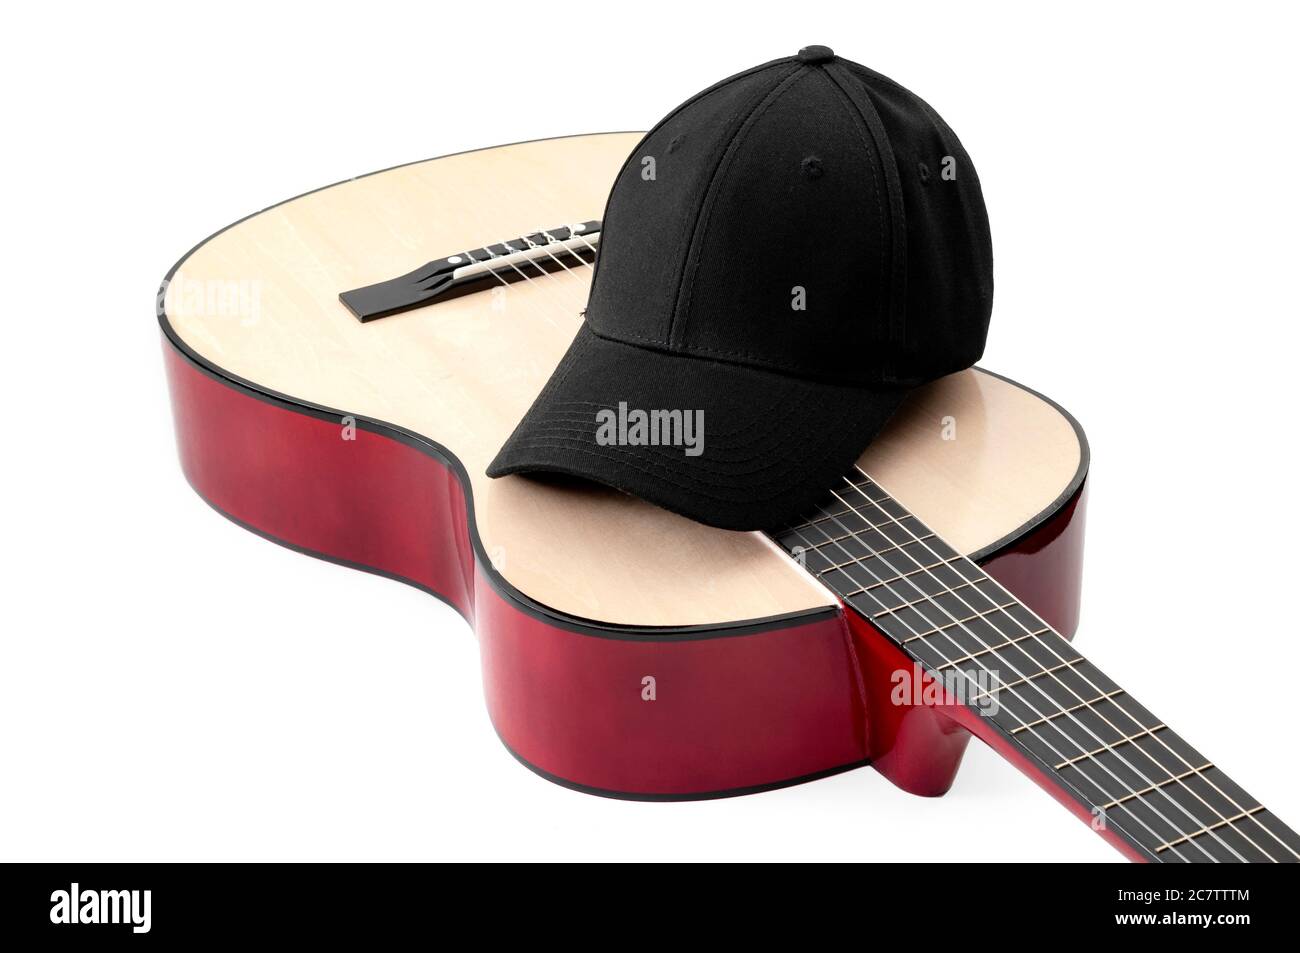 American culture, folk song and country music concept theme with a black baseball cap and an acoustic guitar isolated on white background with clippin Stock Photo